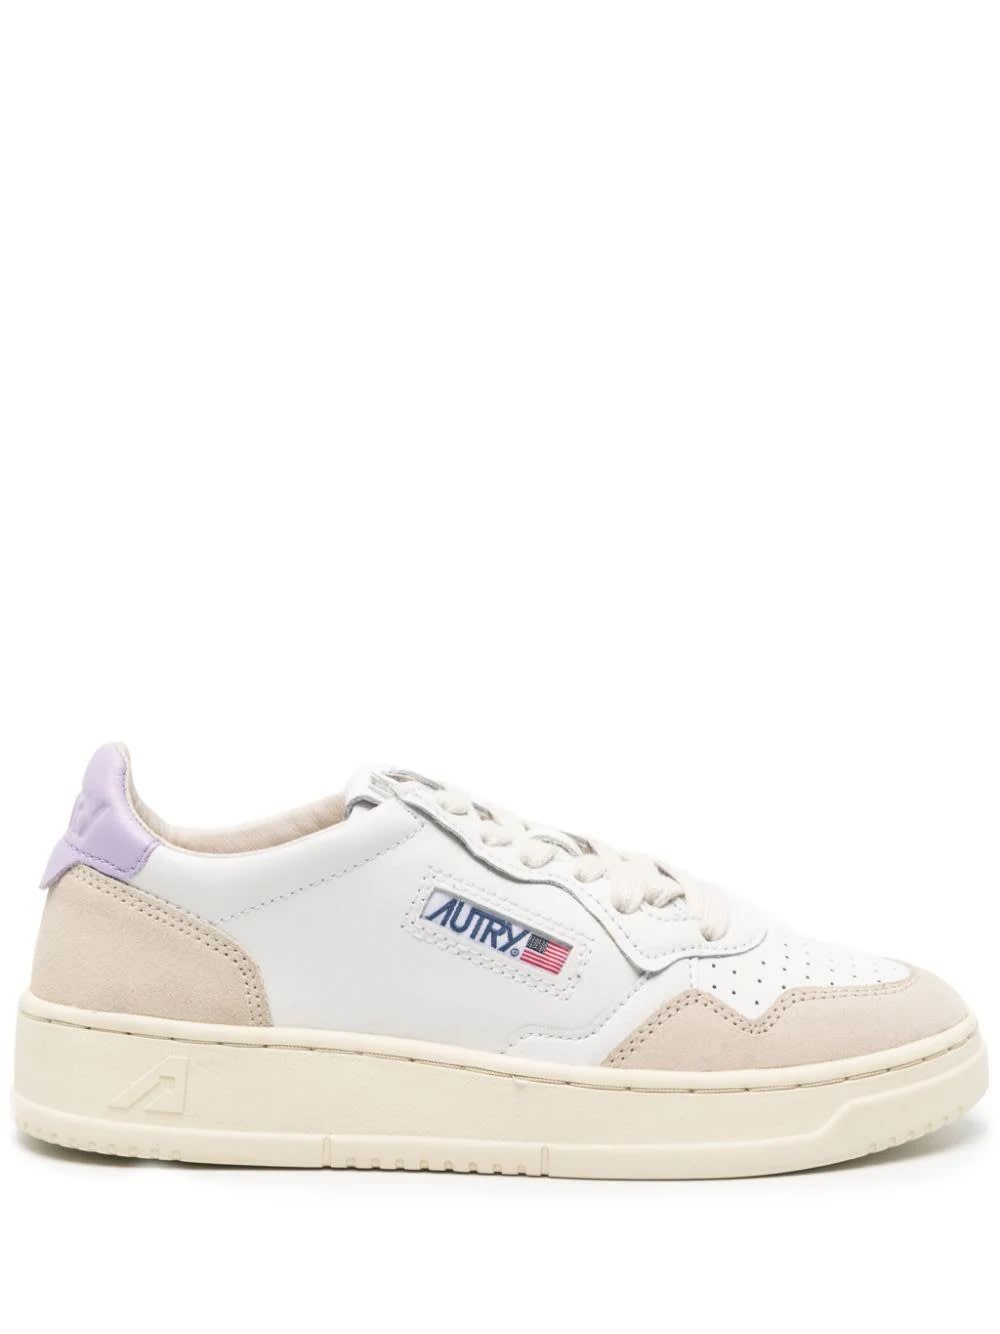 Shop Autry Medalist Low Sneakers In White And Lilac Suede And Leather